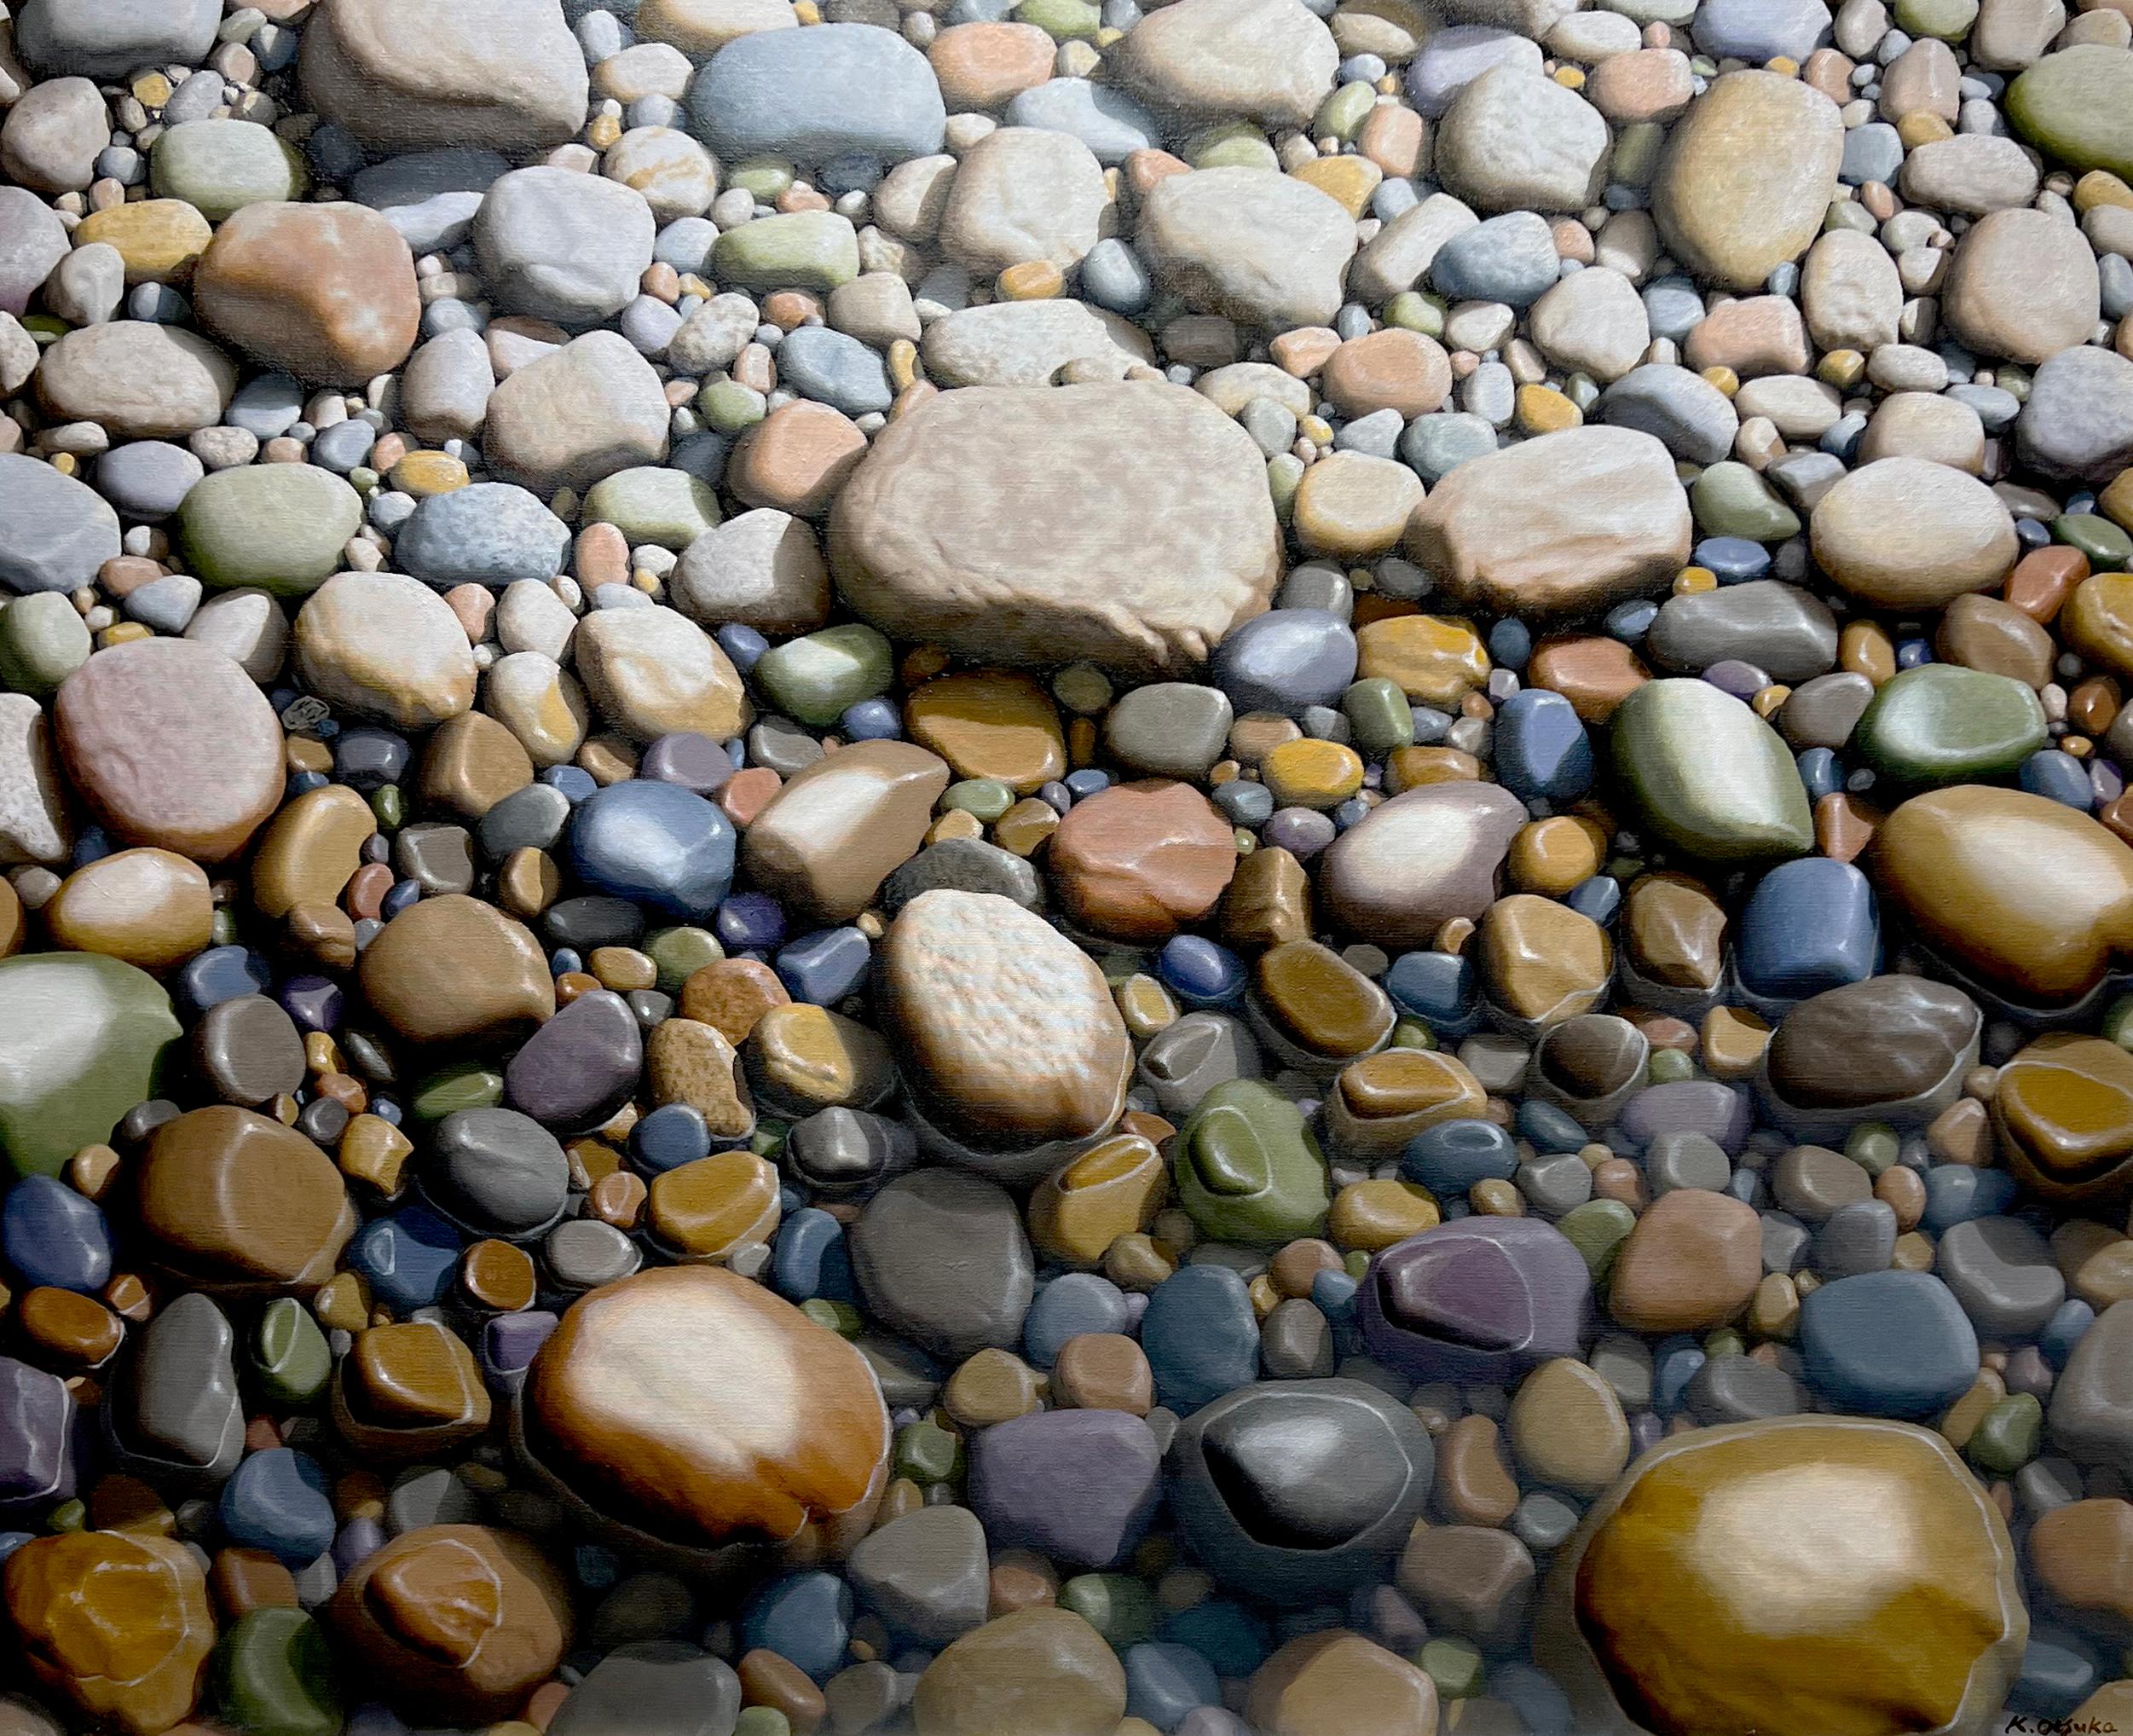 This serene piece, "Quiet Conversation", is a 38x46 oil painting on canvas by artist Ken Otsuka featuring a unique perspective, looking straight down on a pebble covered beach.  Hundreds of multi-colored rocks and pebbles scatter the ground, half